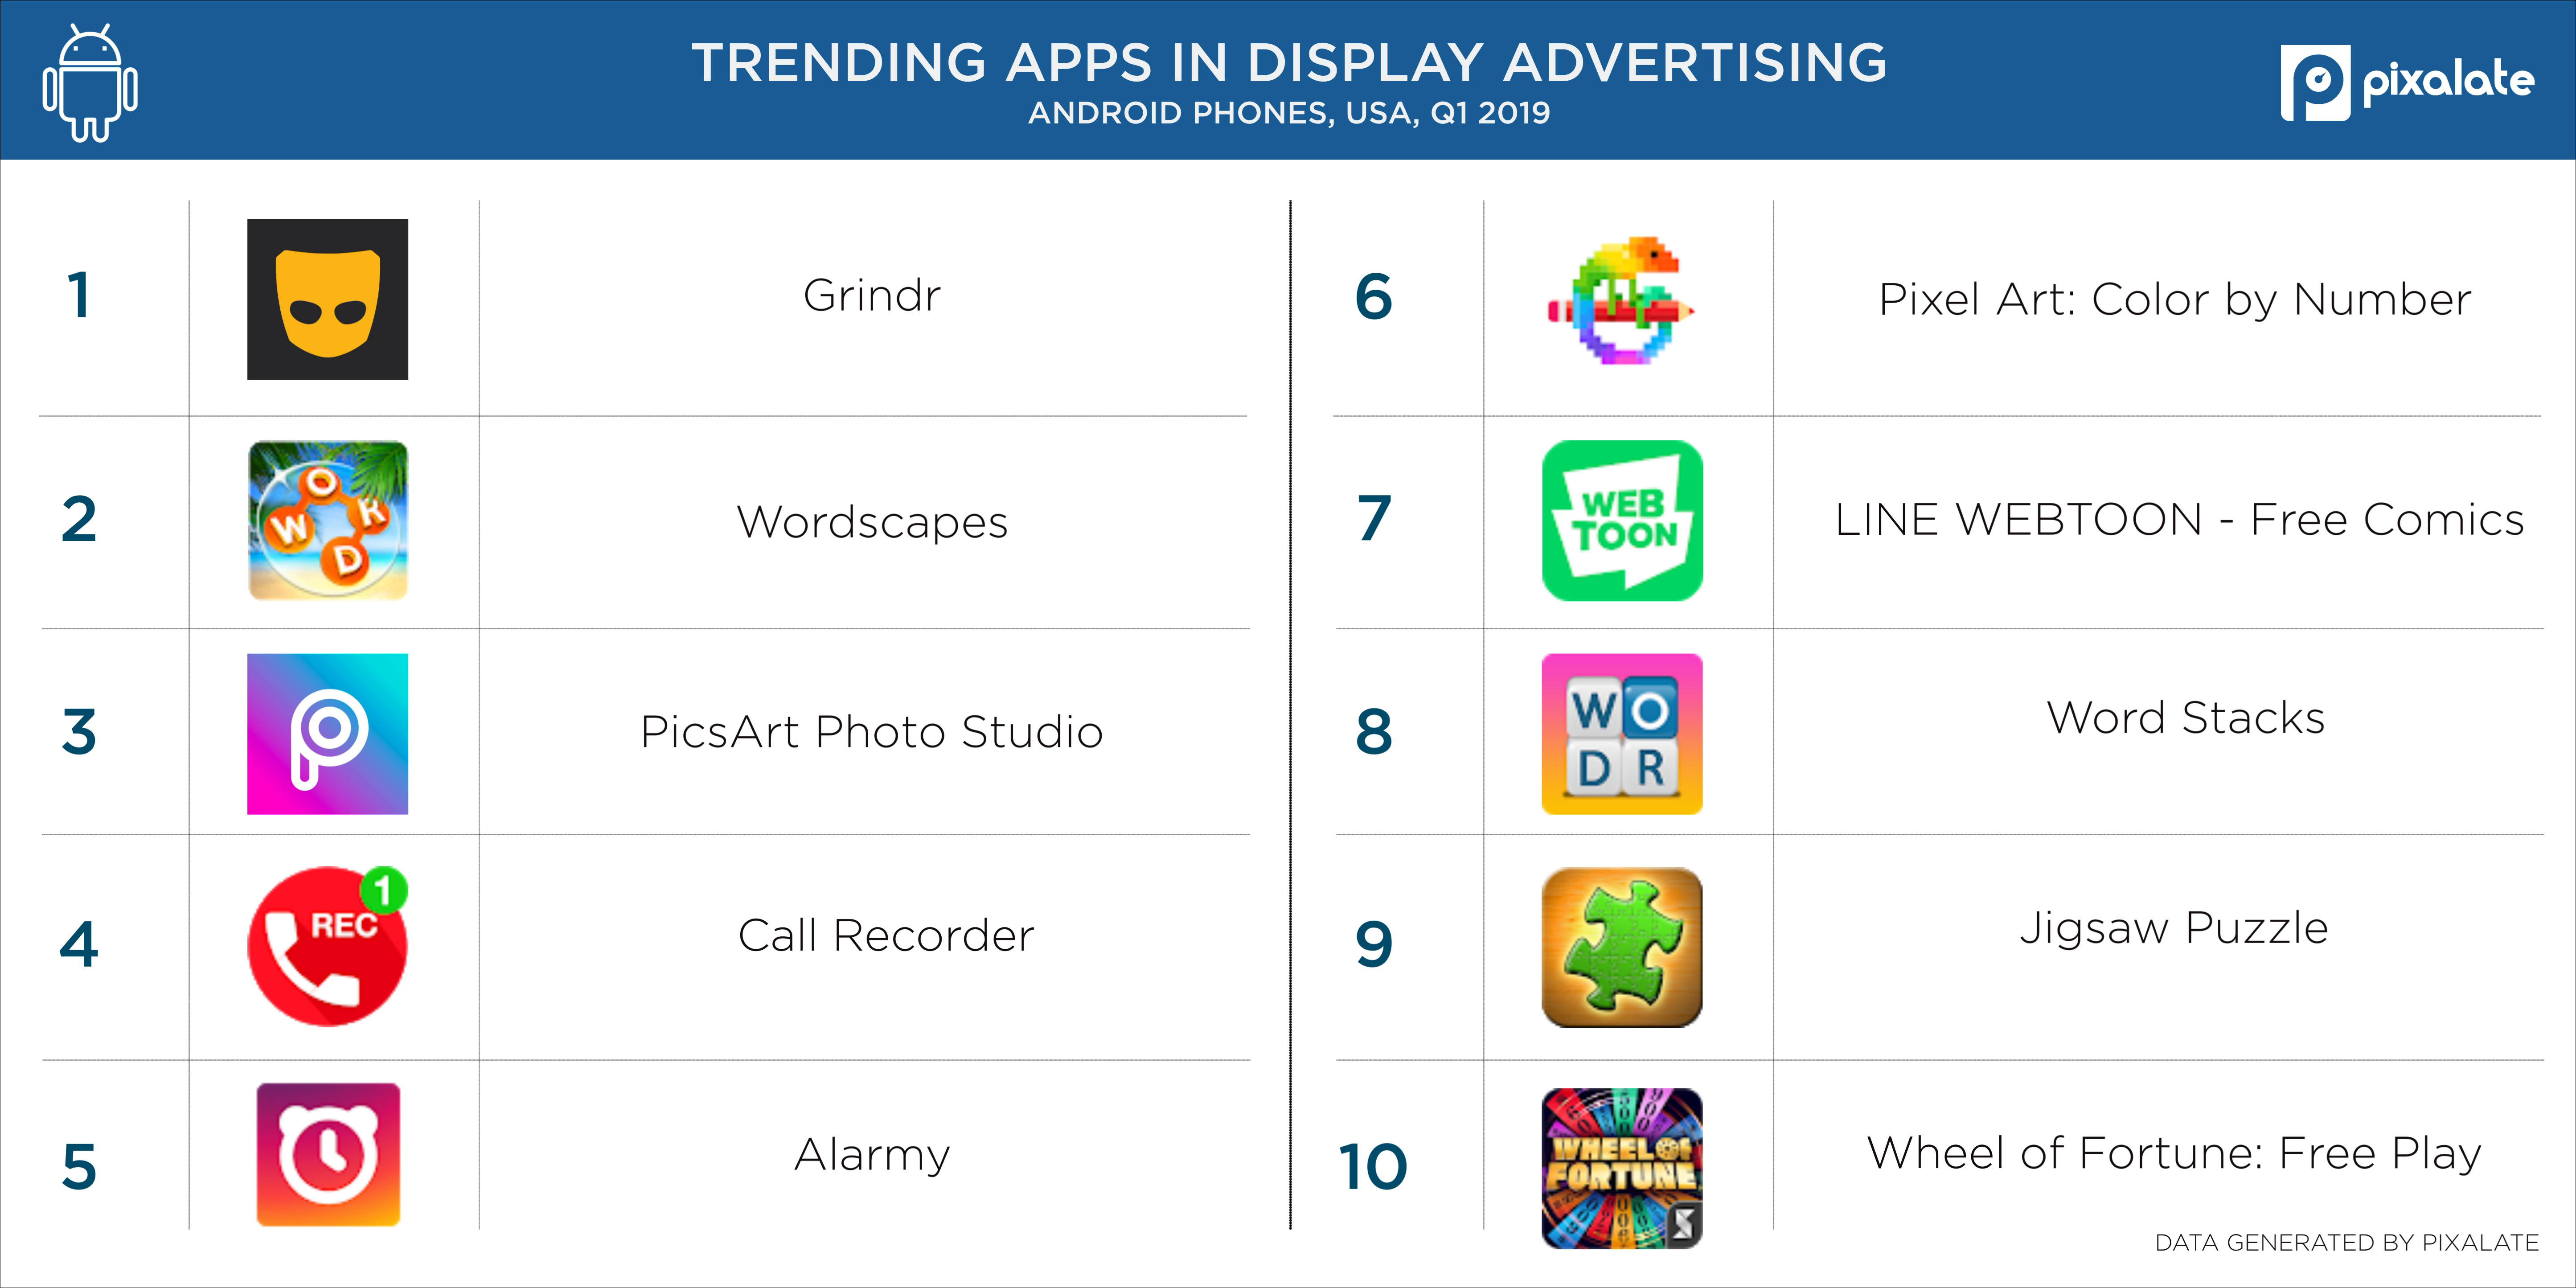 Games account 90% of the top 10 trending for programmatic video ad volume